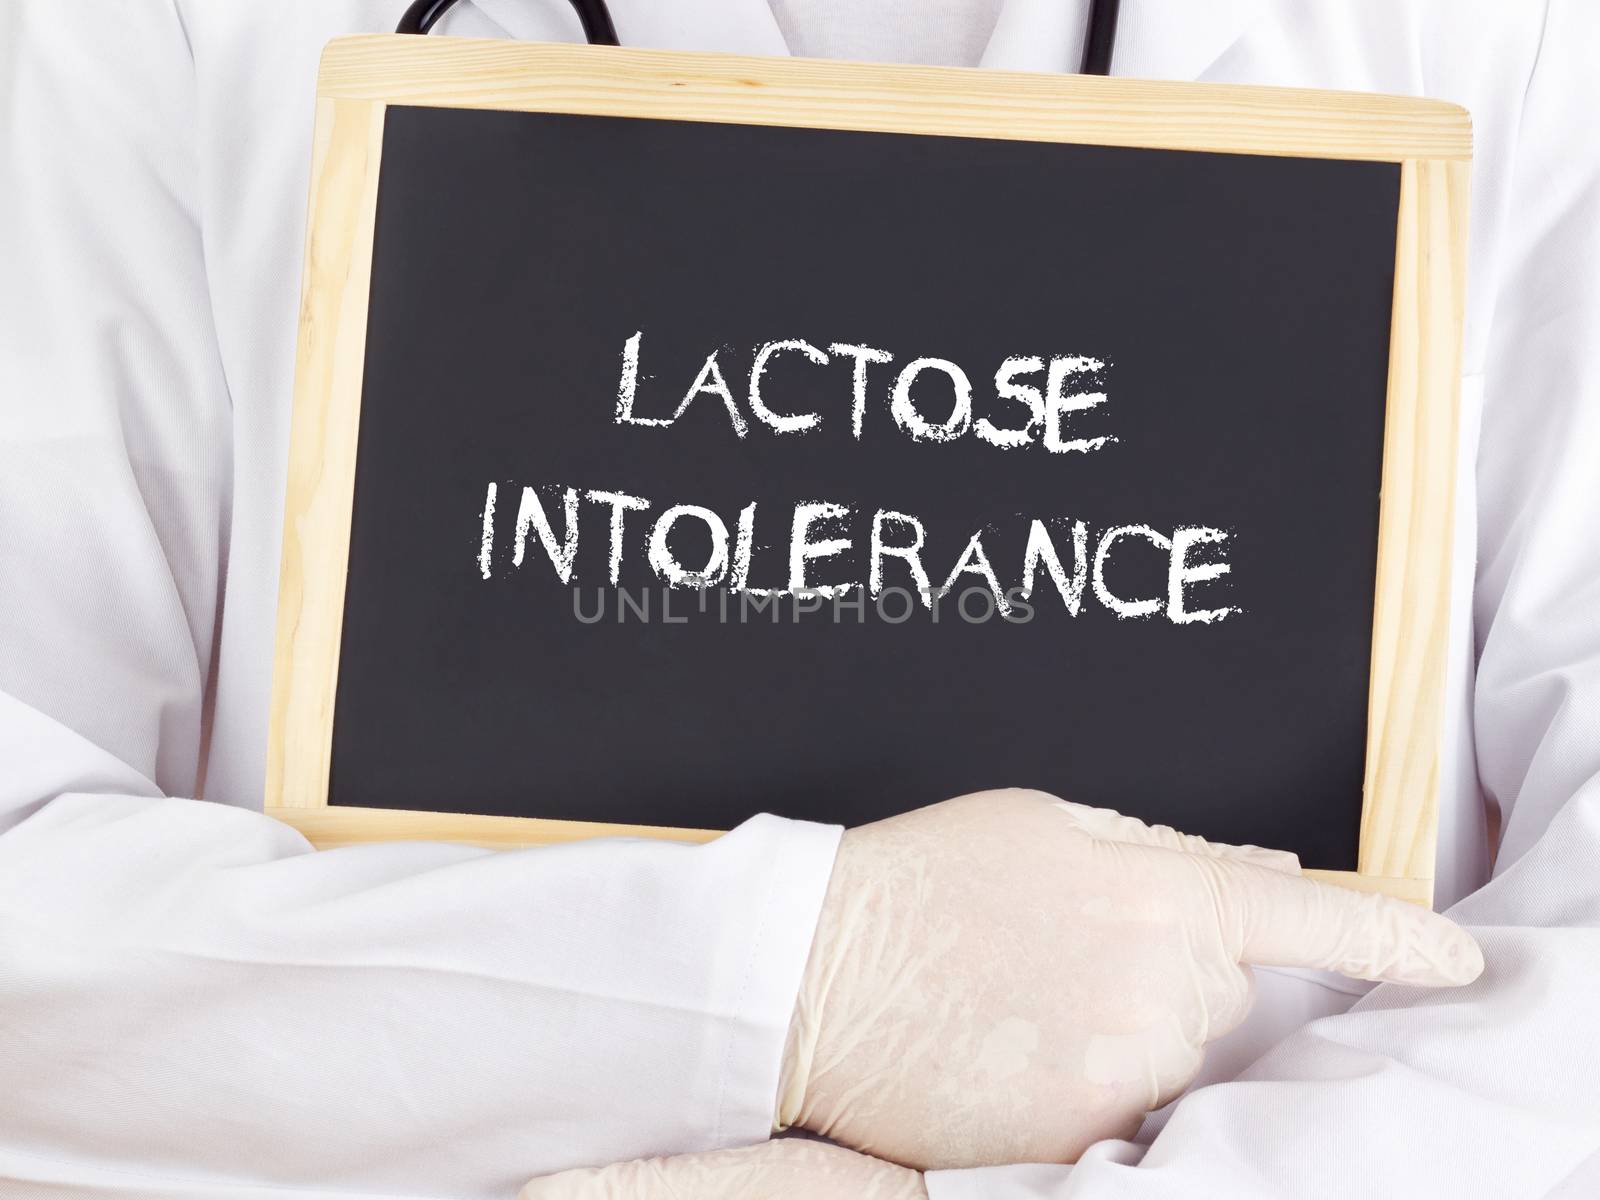 Doctor shows information on blackboard: lactose intolerance by gwolters